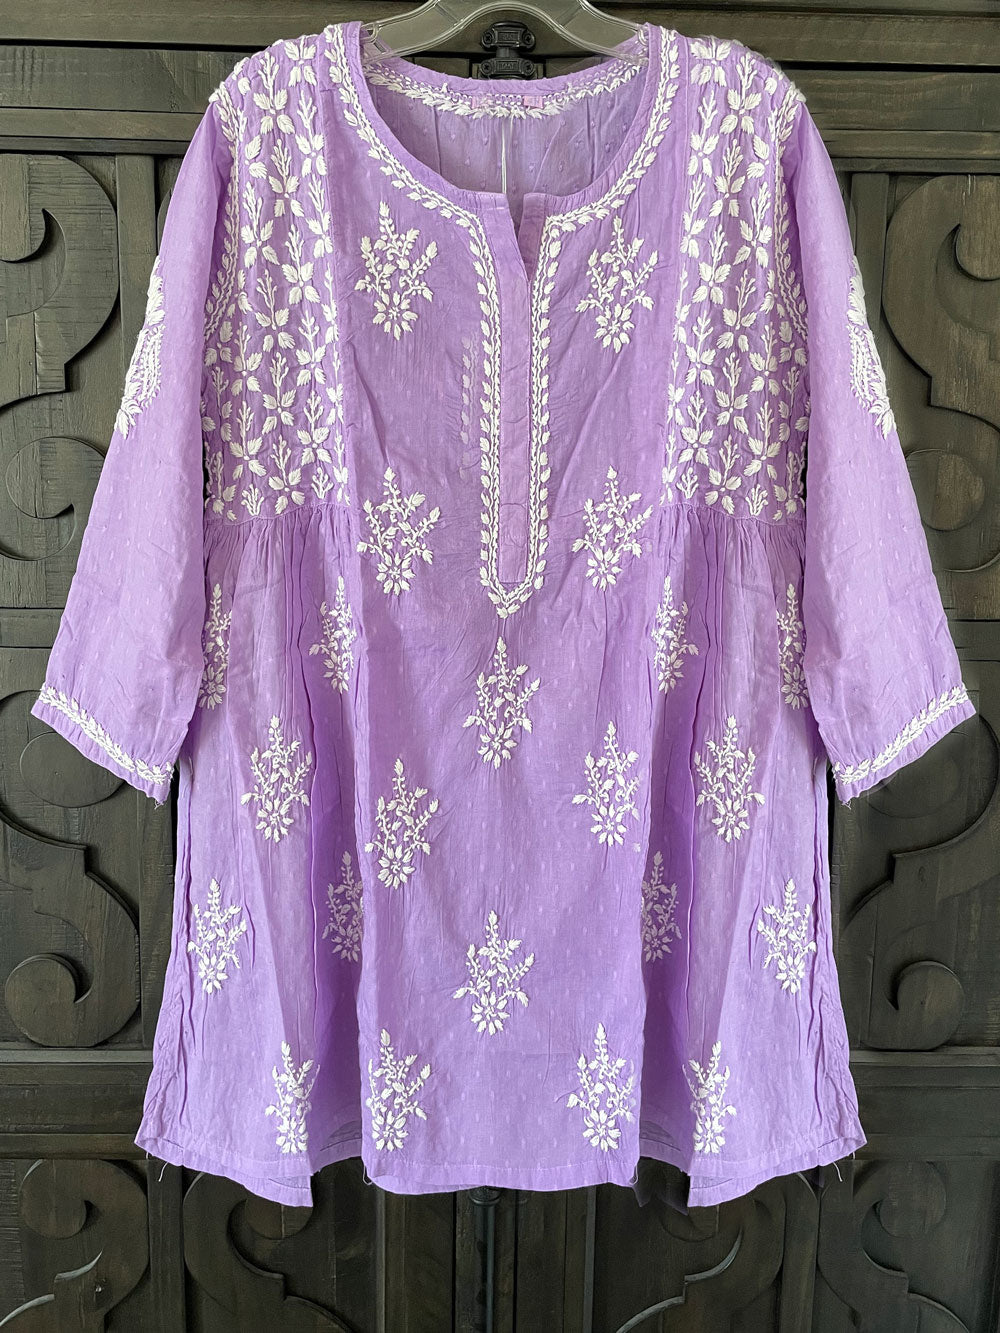 Women's Violet Color Pure Cotton Kurti Lucknowi Hand Embroidered Top at PinkPhulkari California